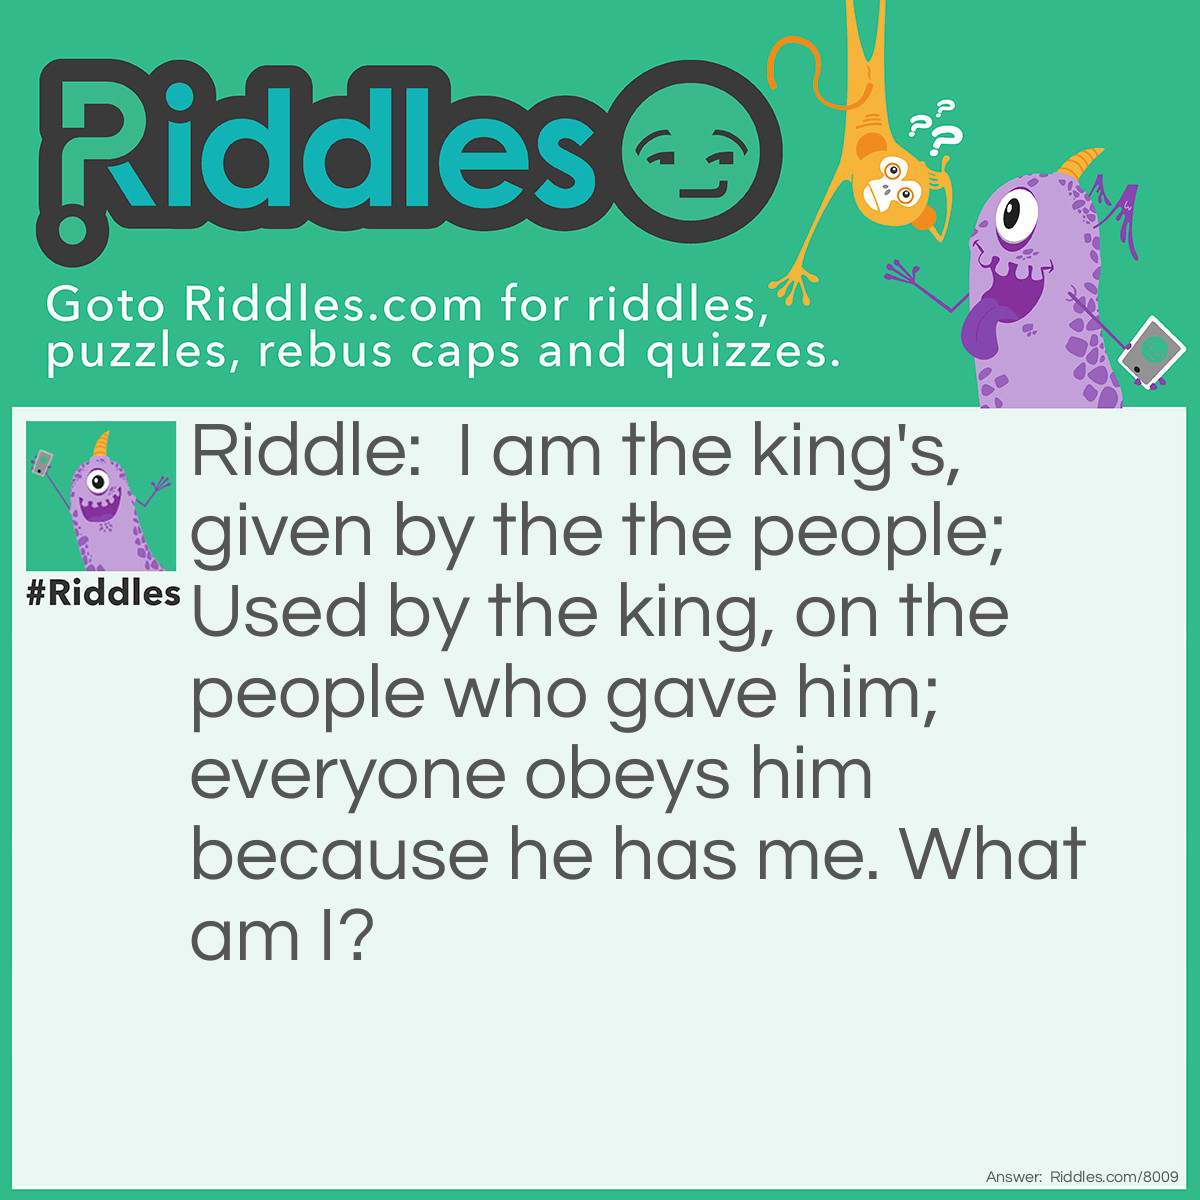 Riddle: I am the king's, given by the the people; Used by the king, on the people who gave him; everyone obeys him because he has me. What am I? Answer: Authority!